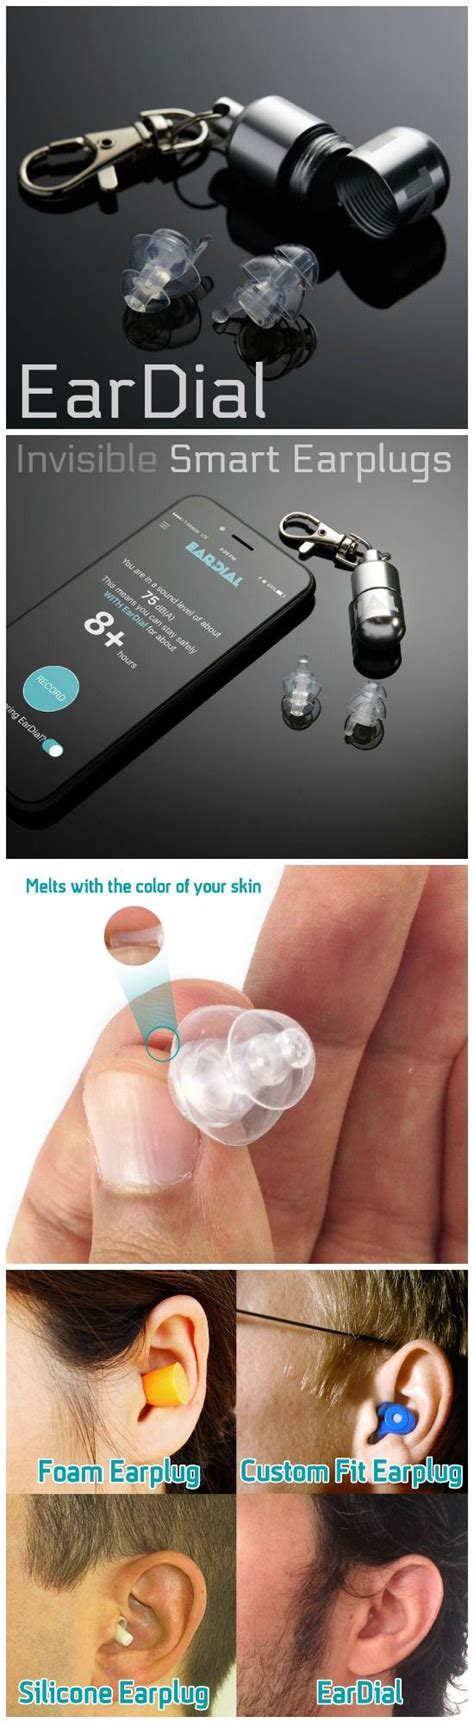 Eardial Invisible Smart Earplugs For Live Music The Worlds First